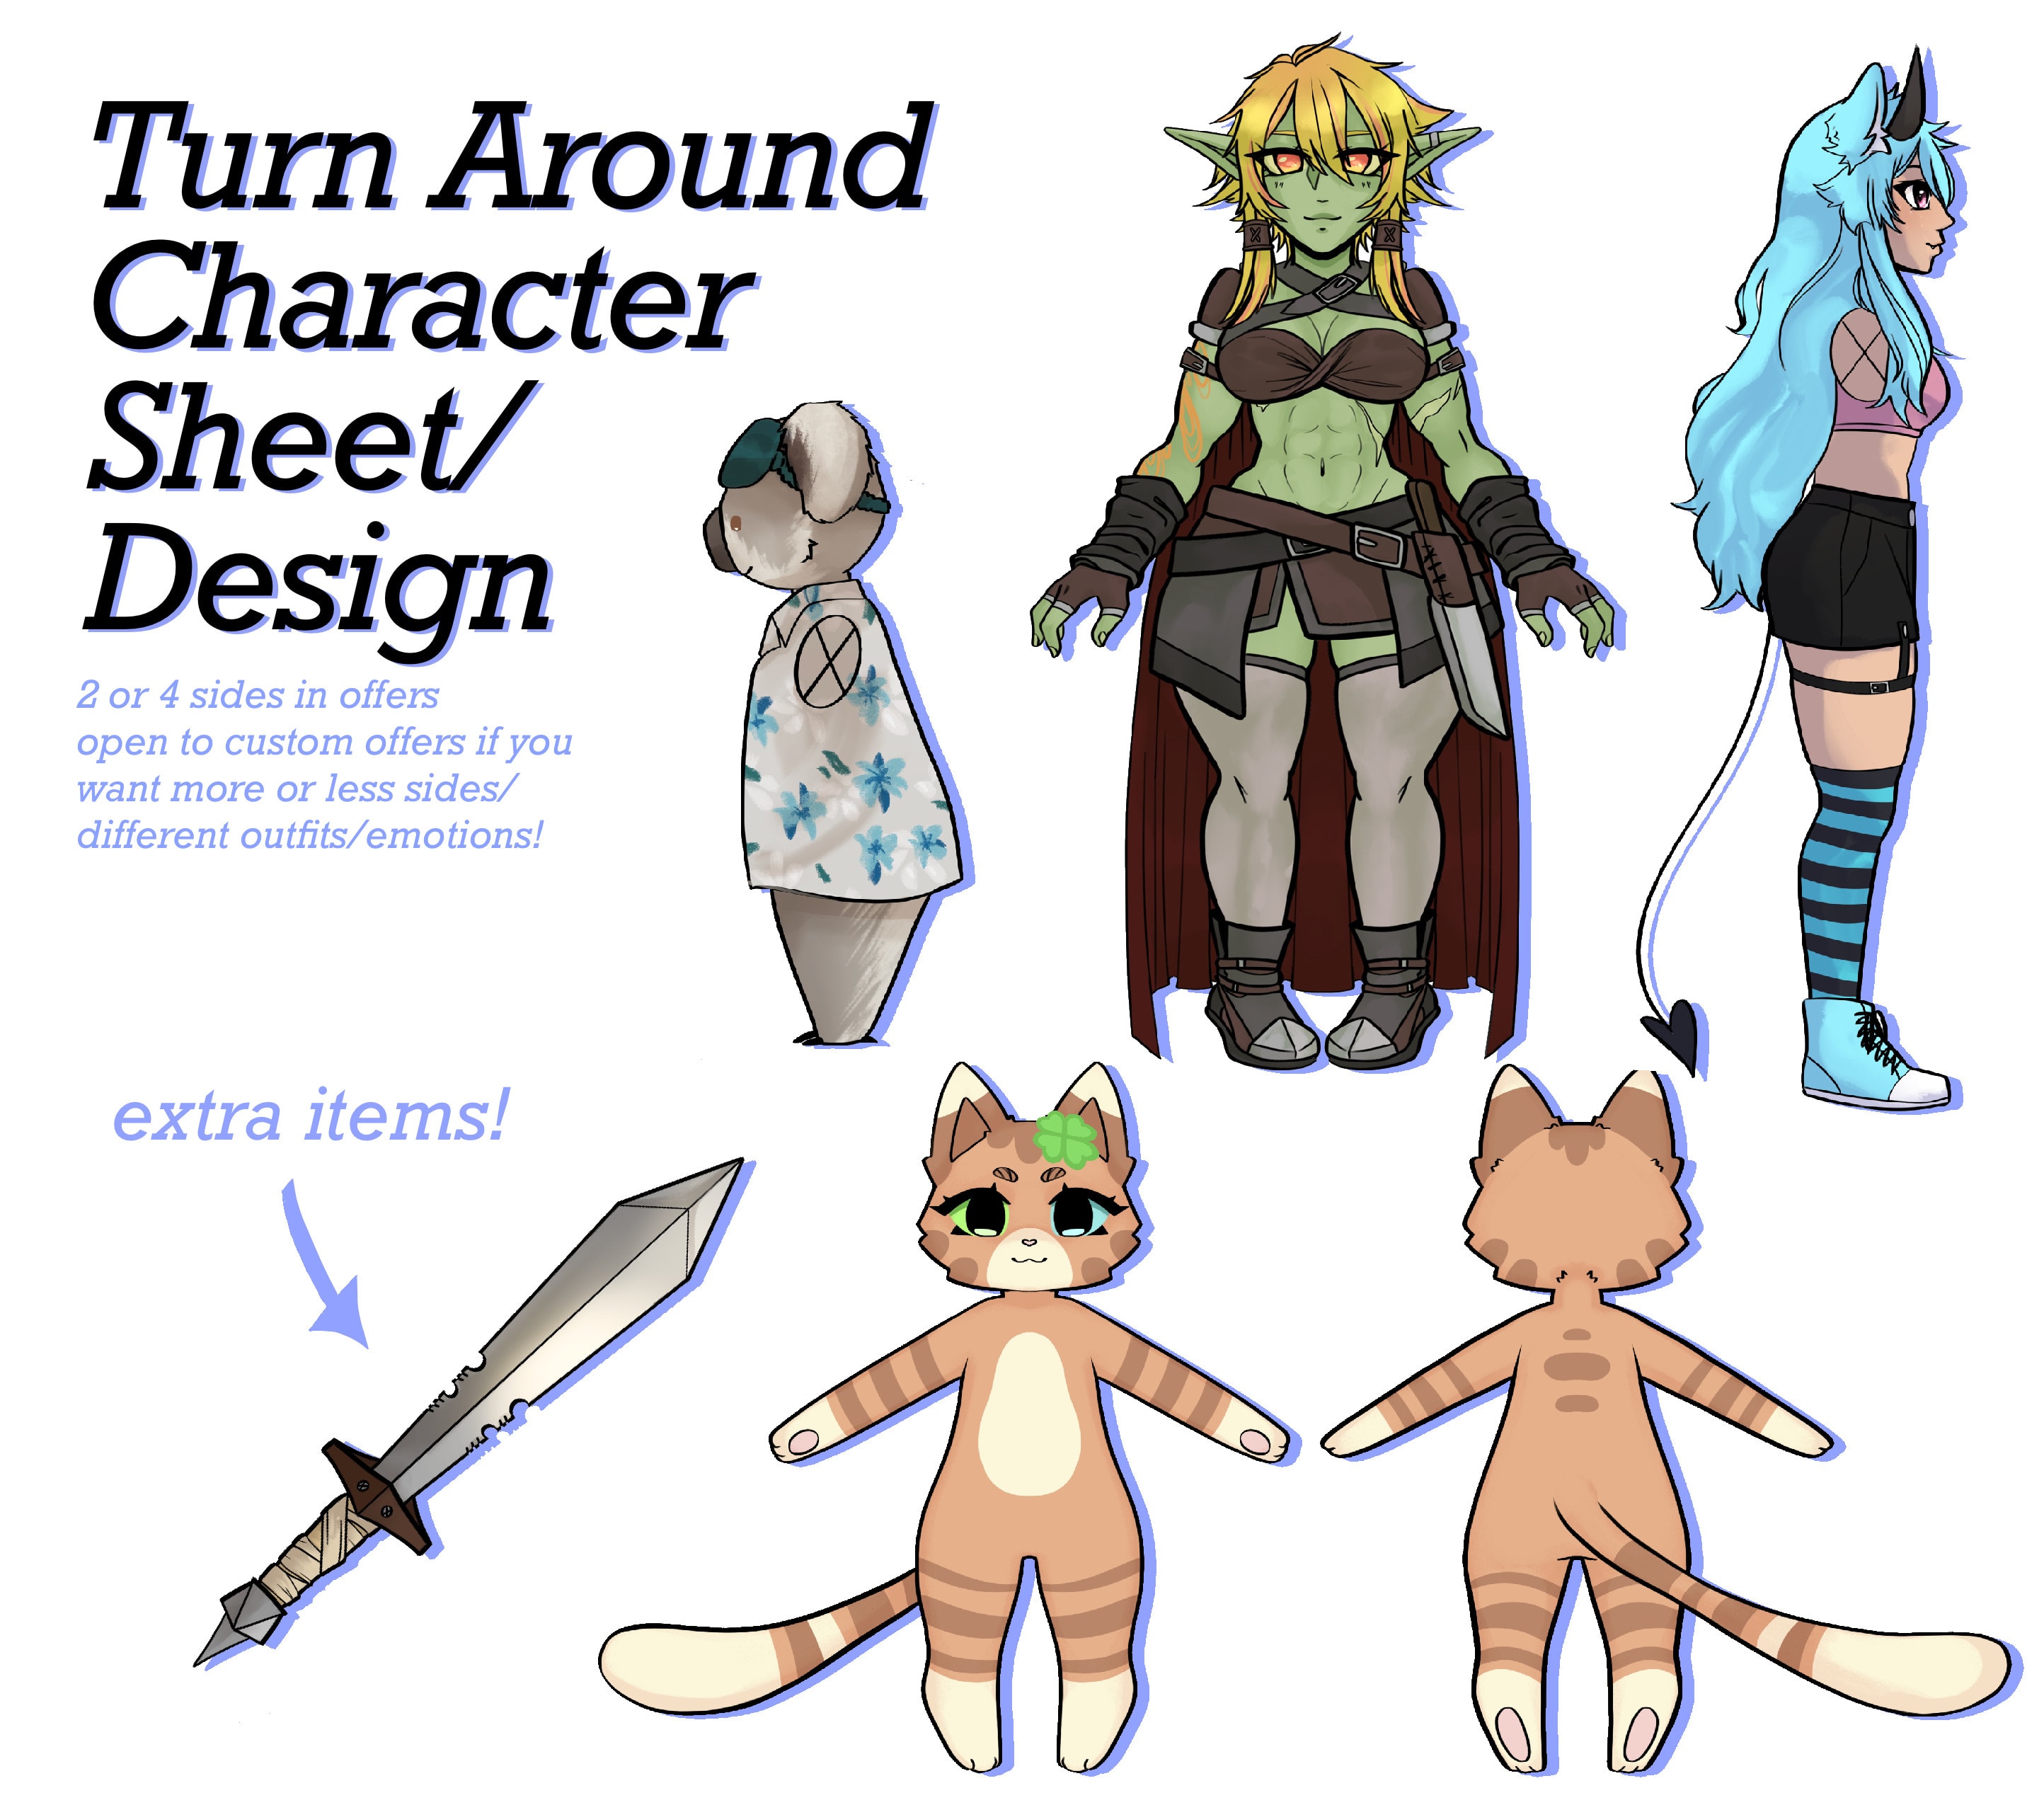 Design a turn around character reference sheet by Lzrswm | Fiverr